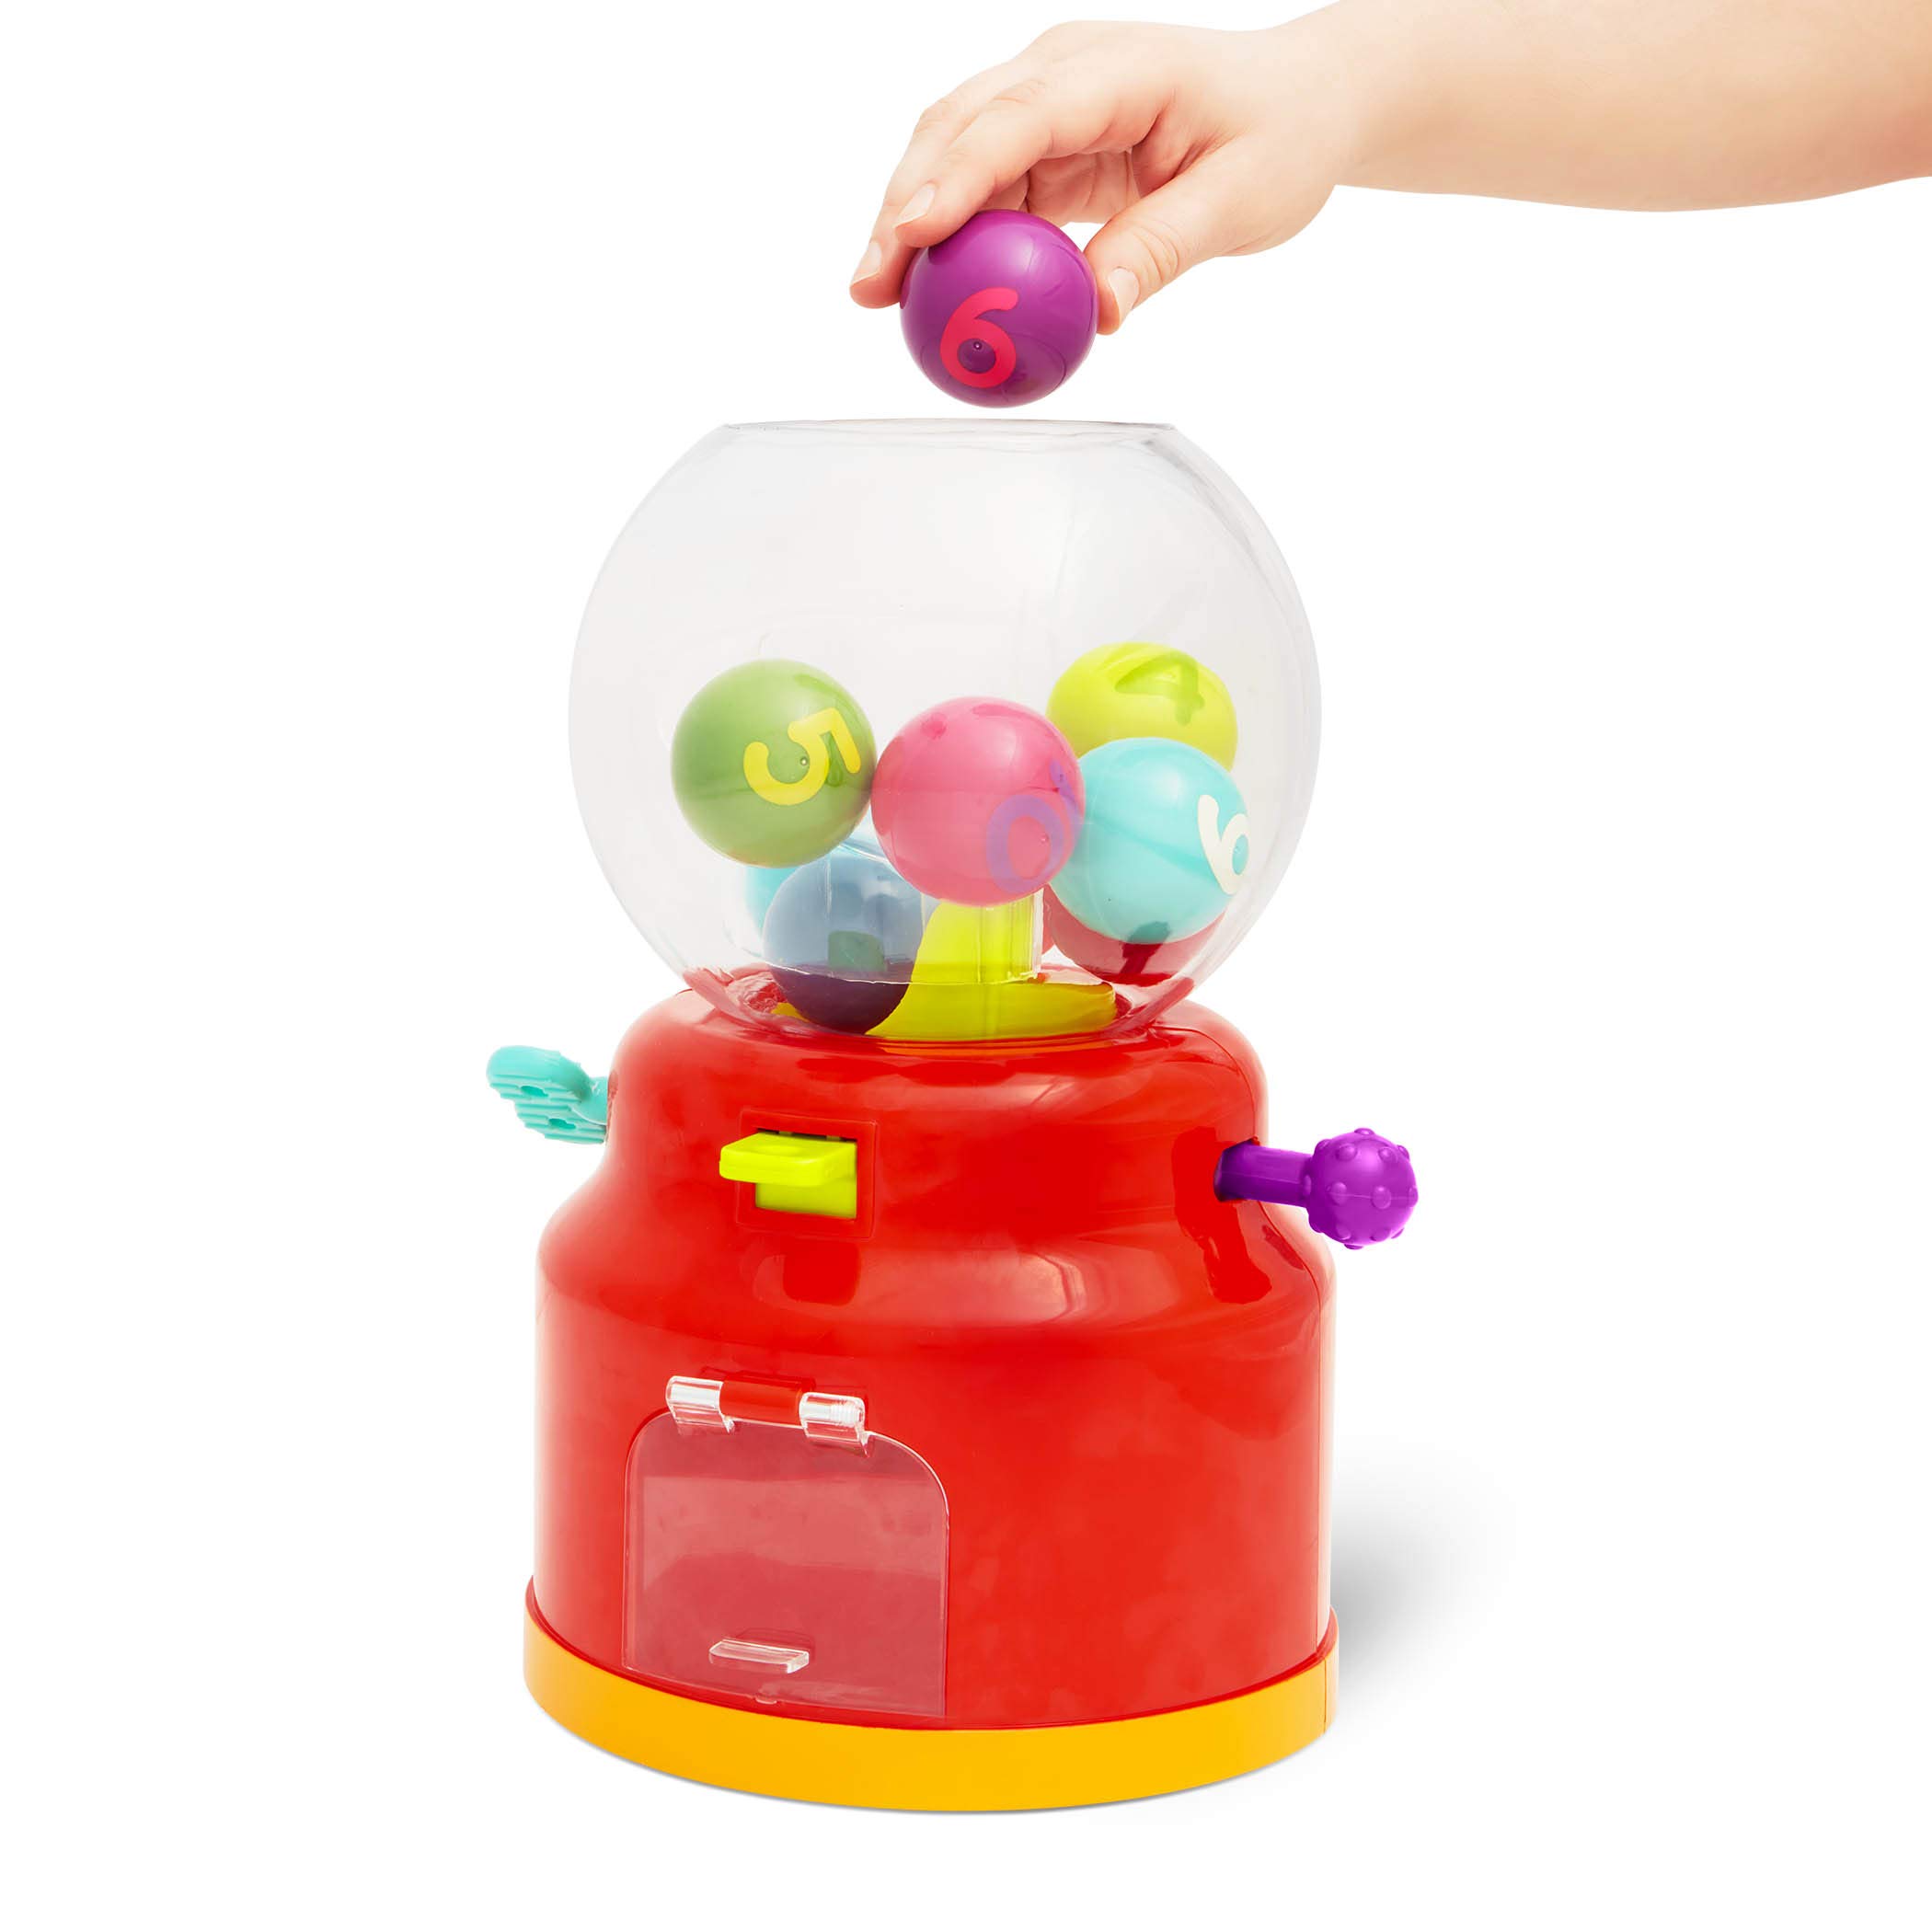 Battat – Ball Dispenser for Kids – Mini Vending Machine Toy – 10 Colorful Number Balls - Numbers & Colors Gumball Machine - Toddlers - 12 Months + , Red